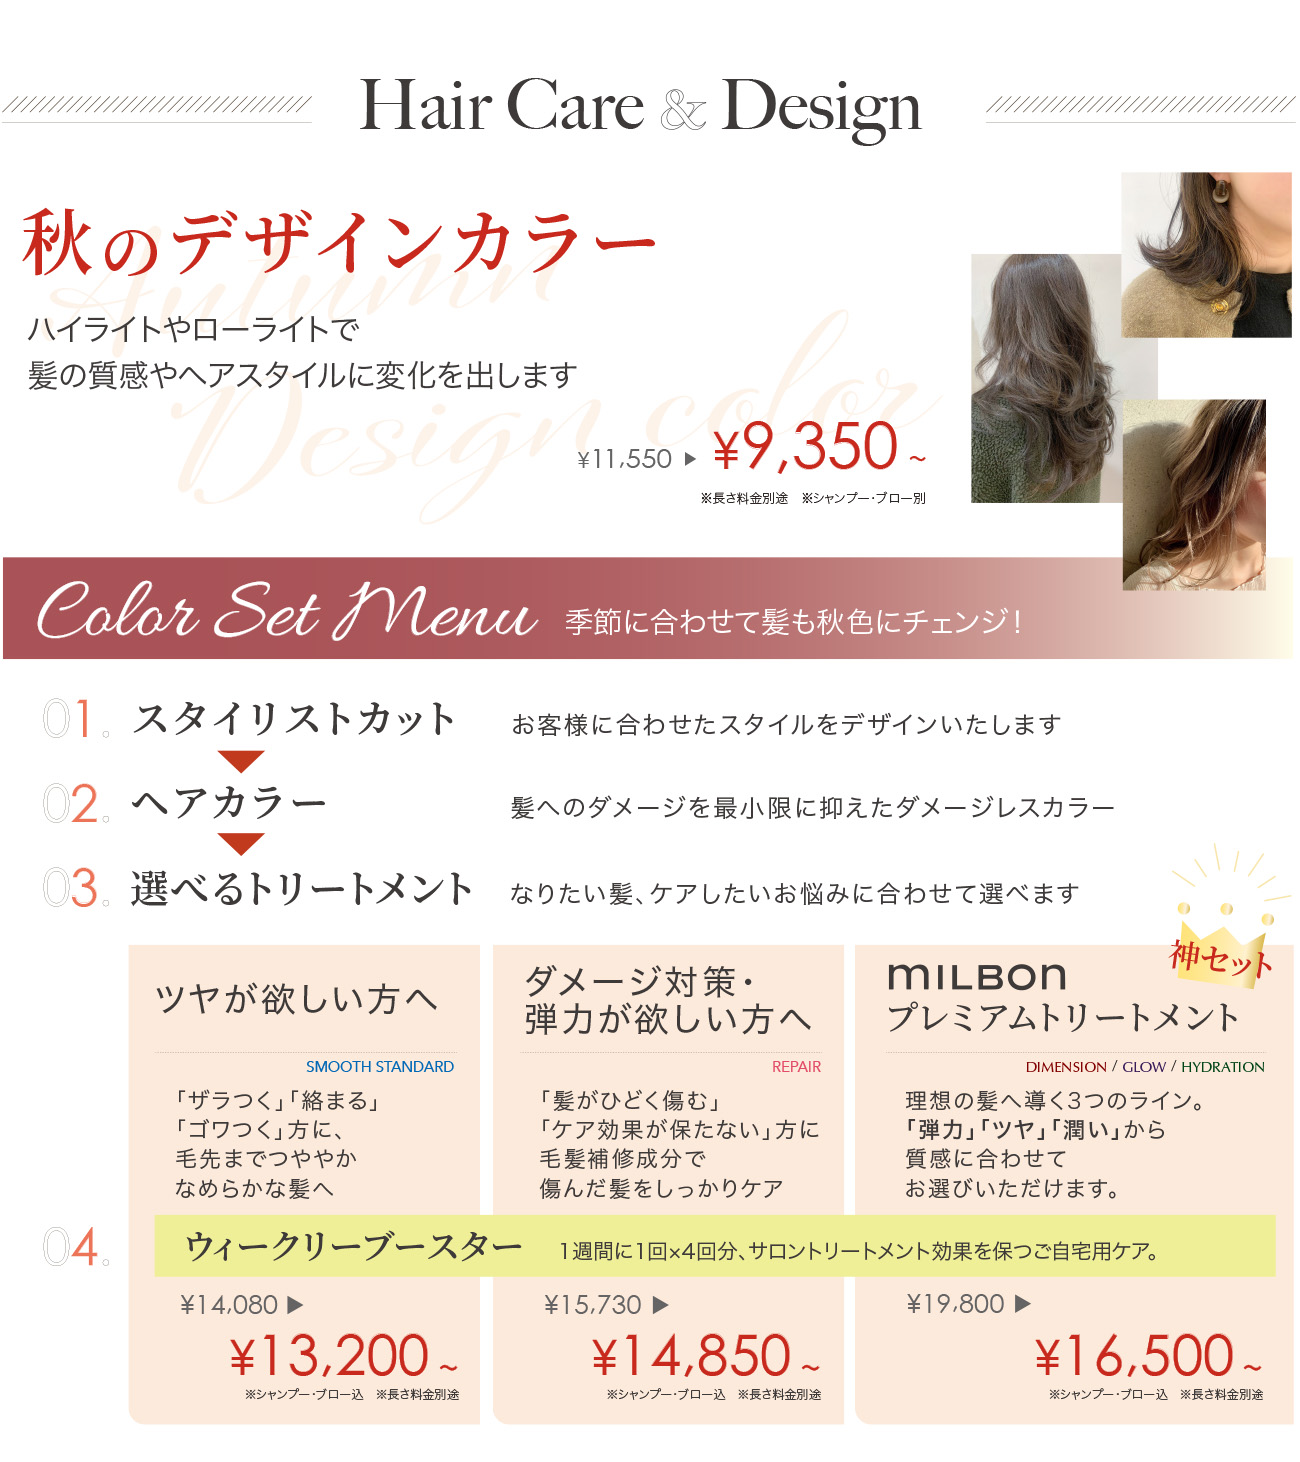 Find a matching Autumn Color | 2021 |lovehair | ラブヘアー | 美容室